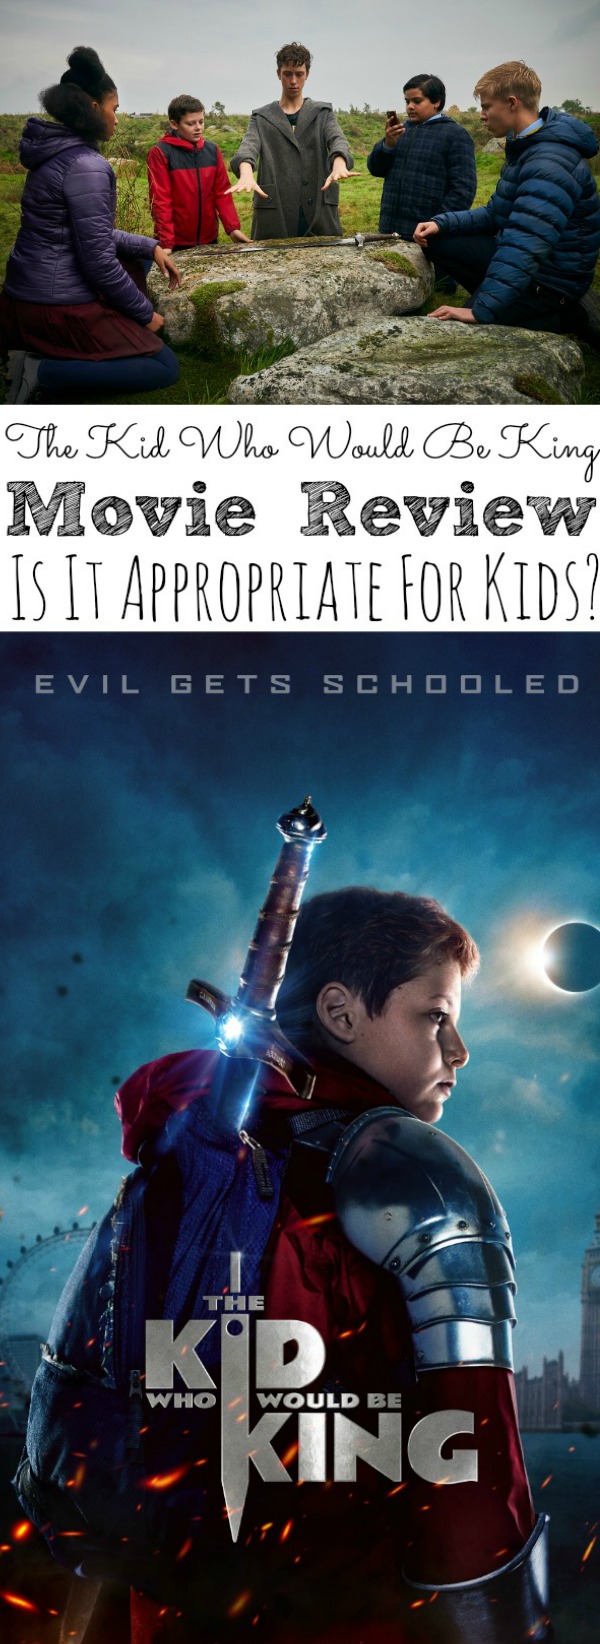 Movie Review The Kid Who Would Be King